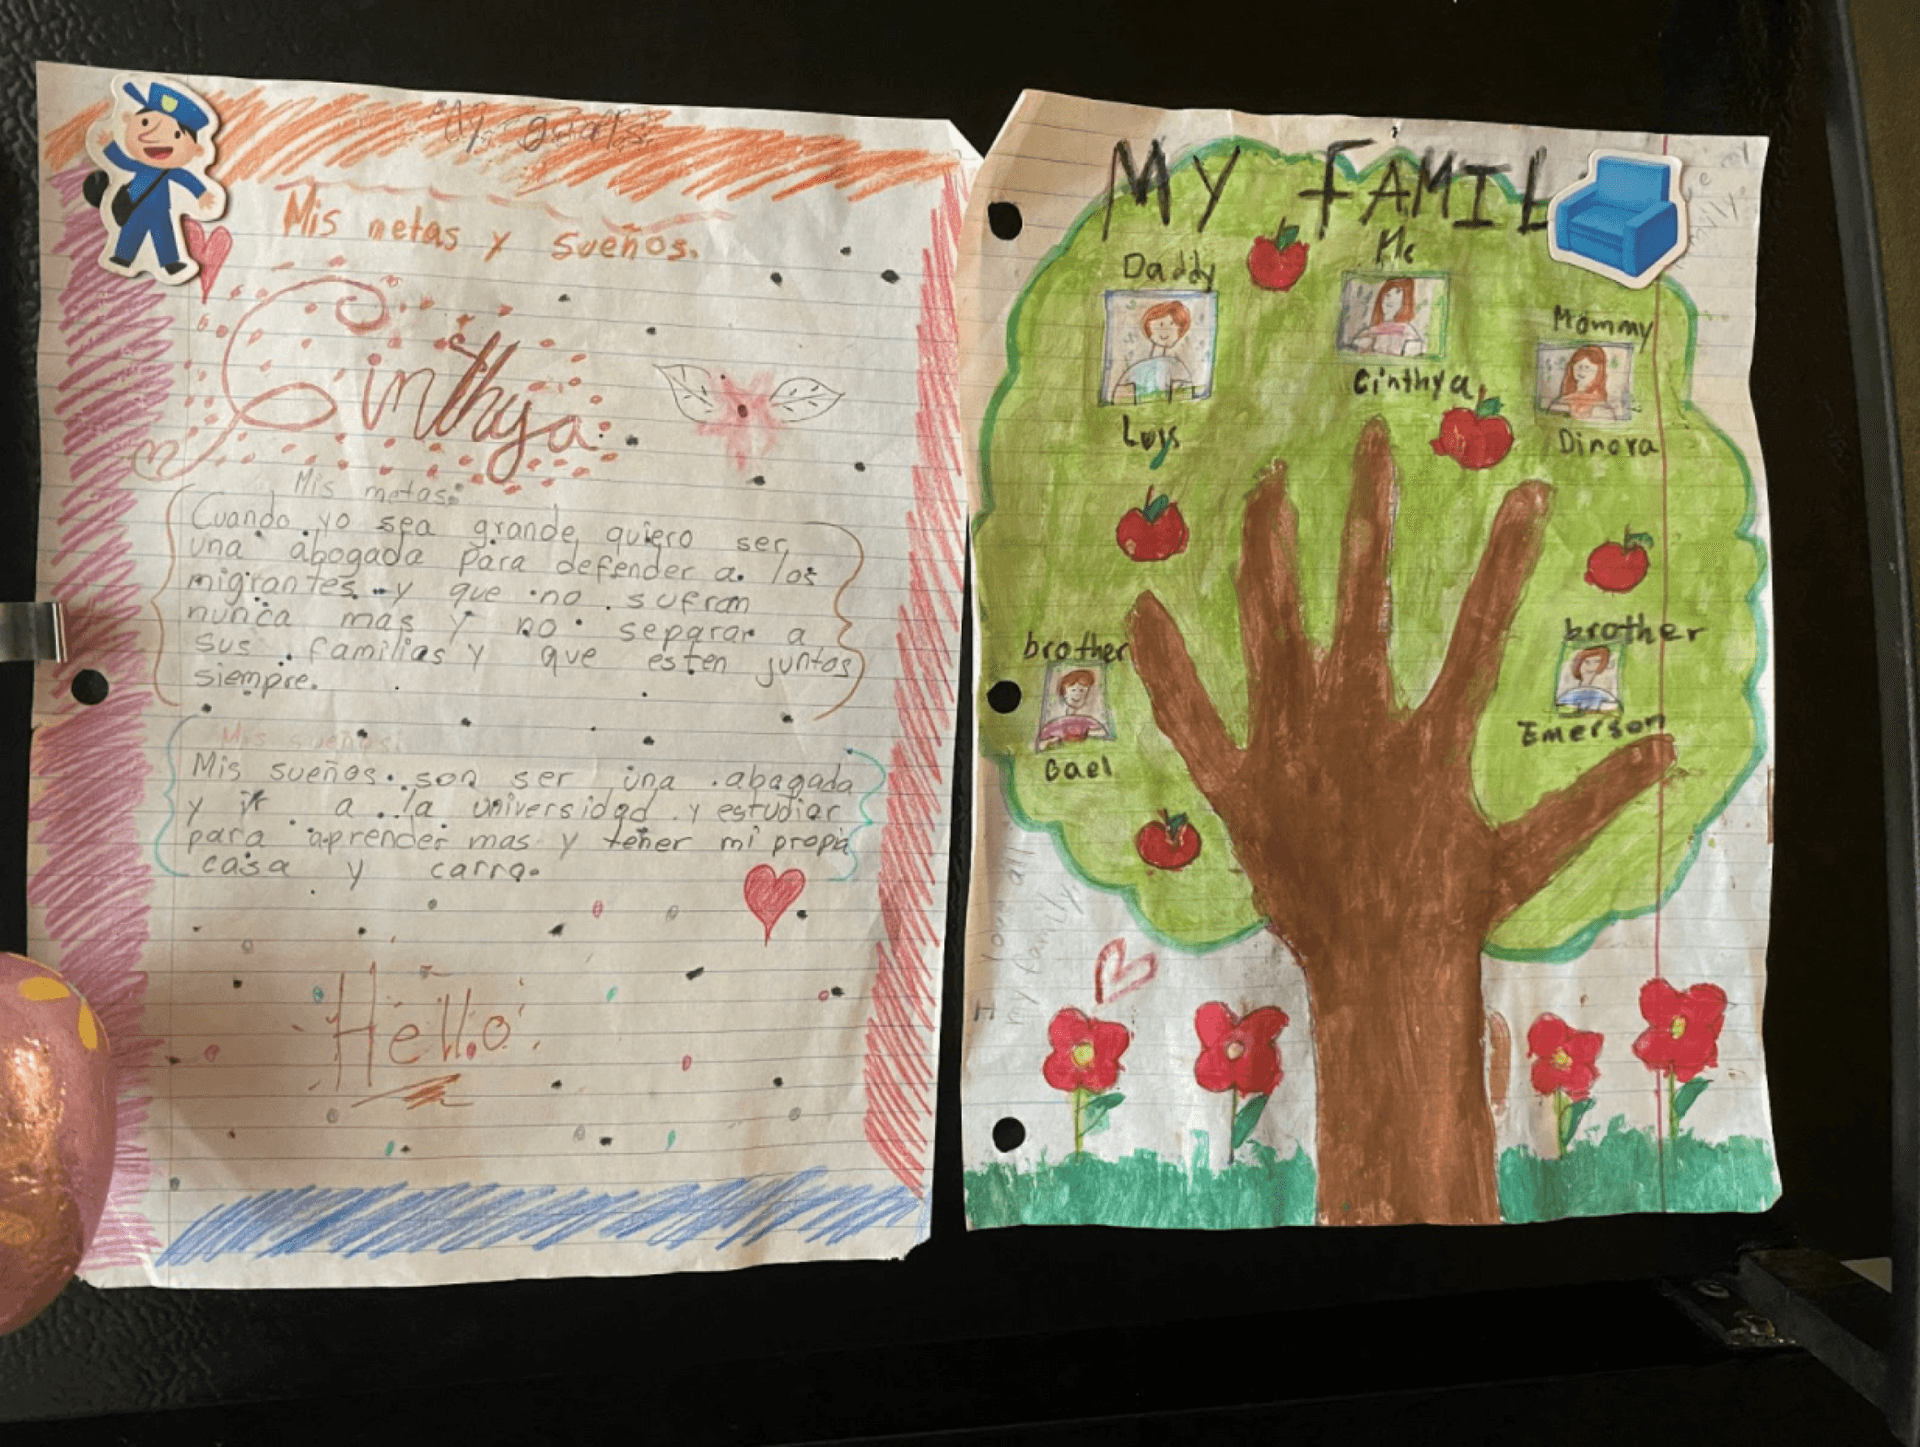 Drawings and writing by Cinthya Hernandez, 11, are posted on her family’s refrigerator.